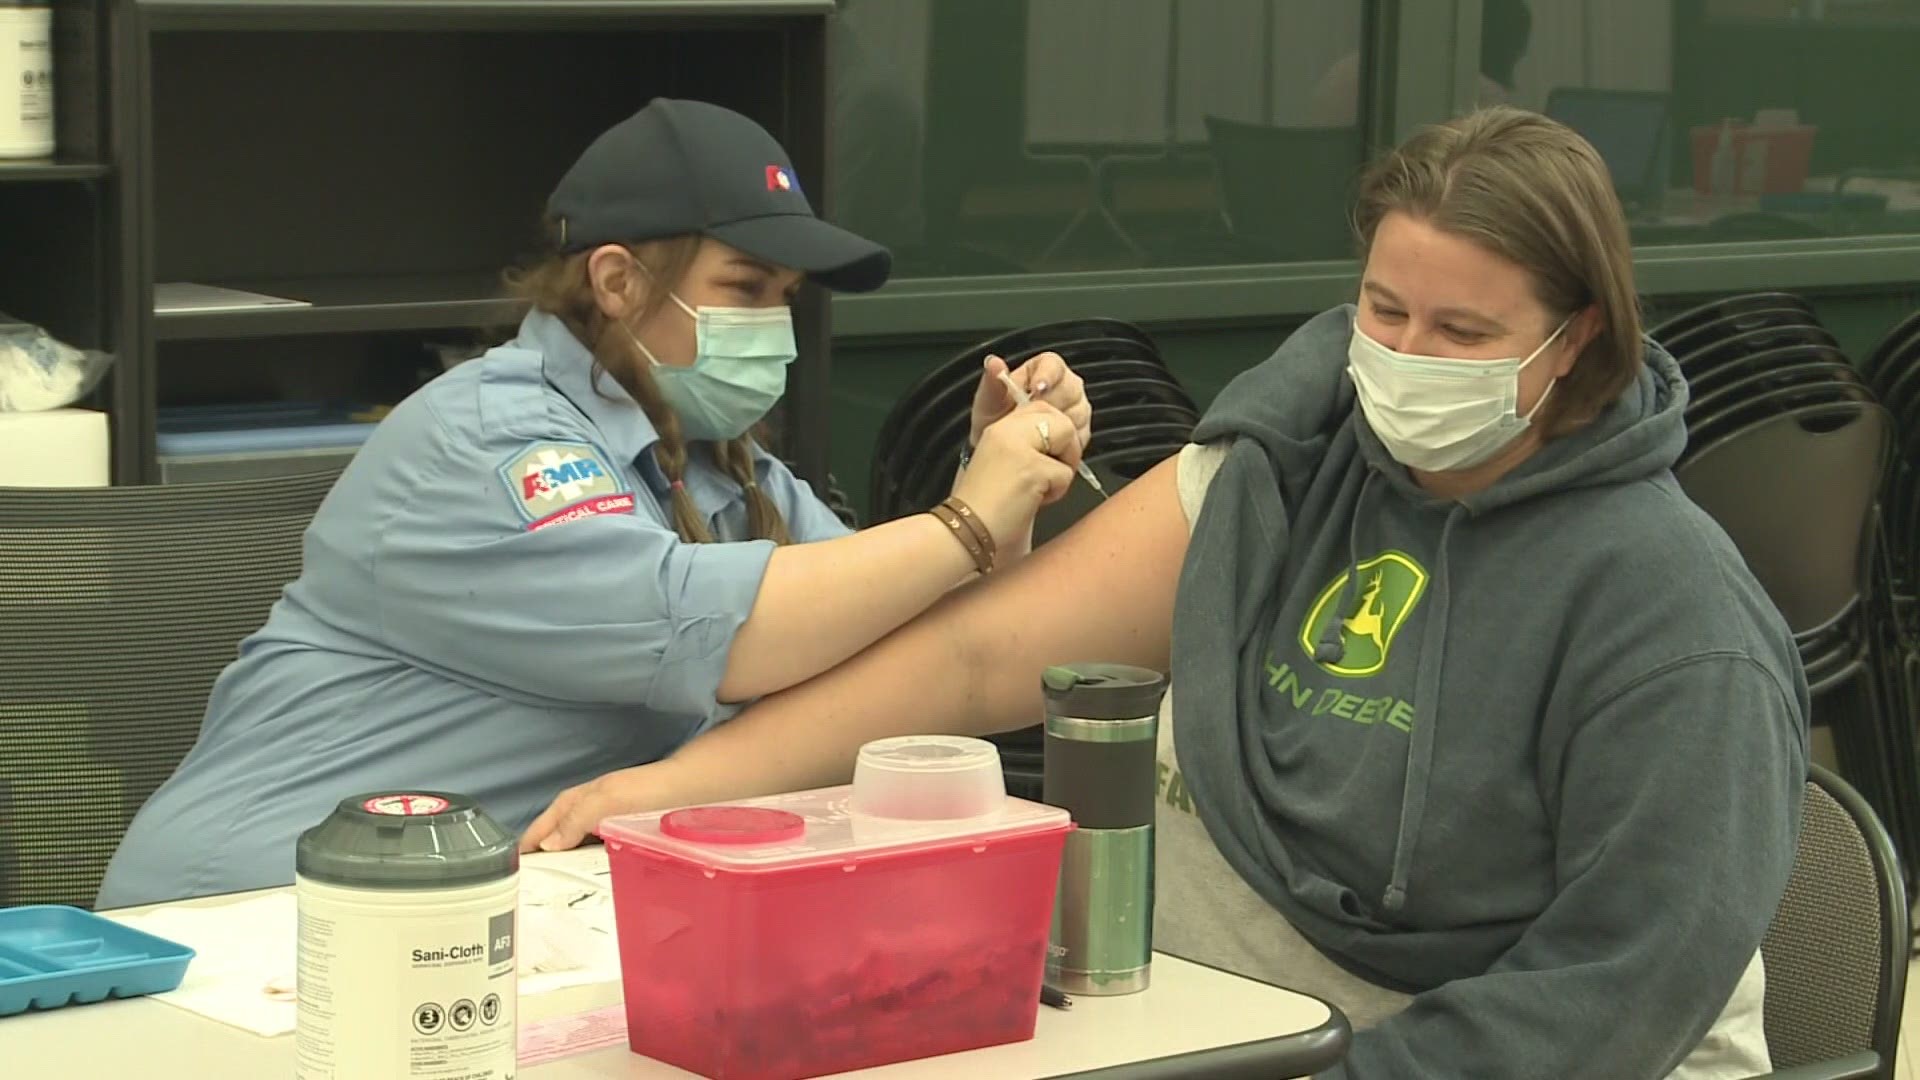 Thousands of vaccines have been administered in West Michigan over the last two weeks, starting with frontline healthcare workers and first responders